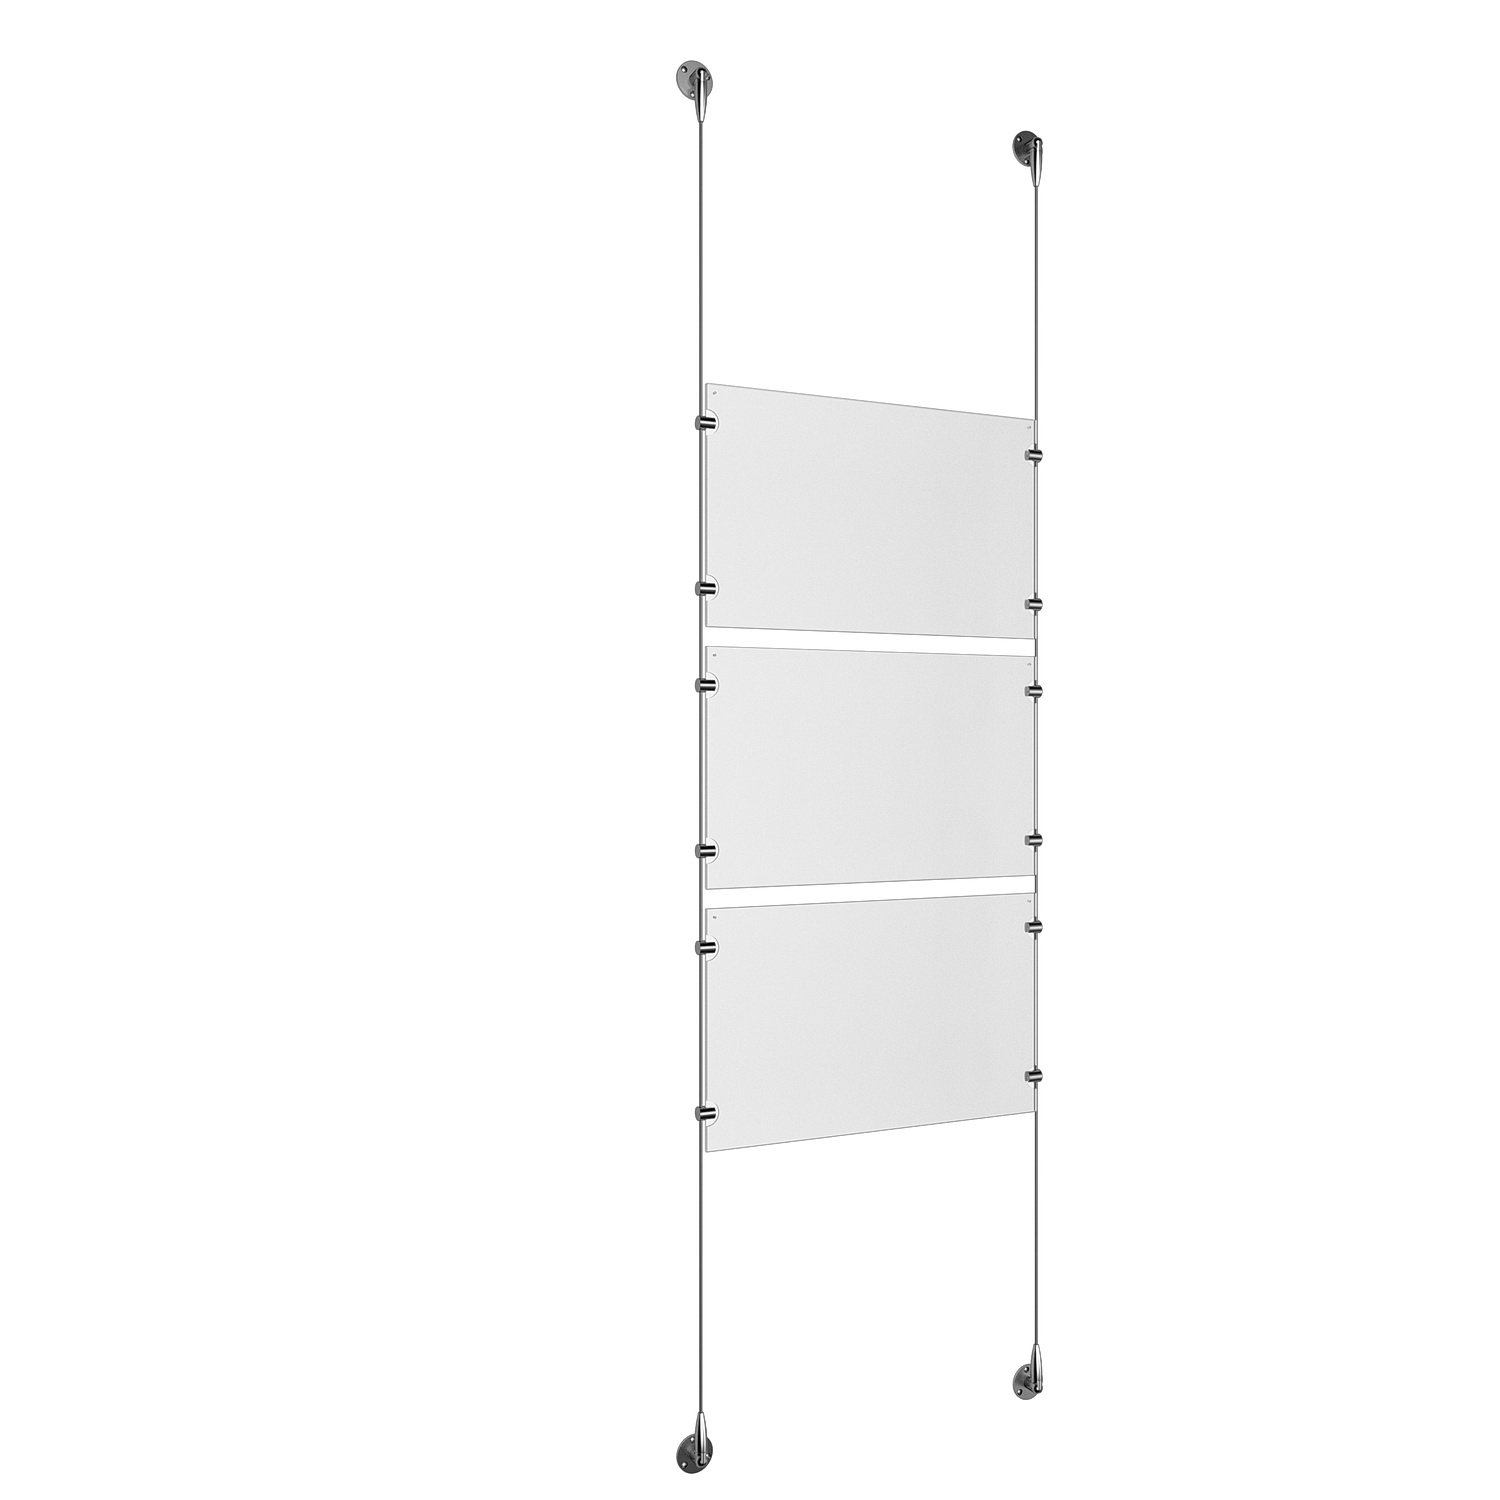 (3) 17'' Width x 11'' Height Clear Acrylic Frame & (2) Stainless Steel Satin Brushed Adjustable Angle Signature 1/8'' Cable Systems with (12) Single-Sided Panel Grippers